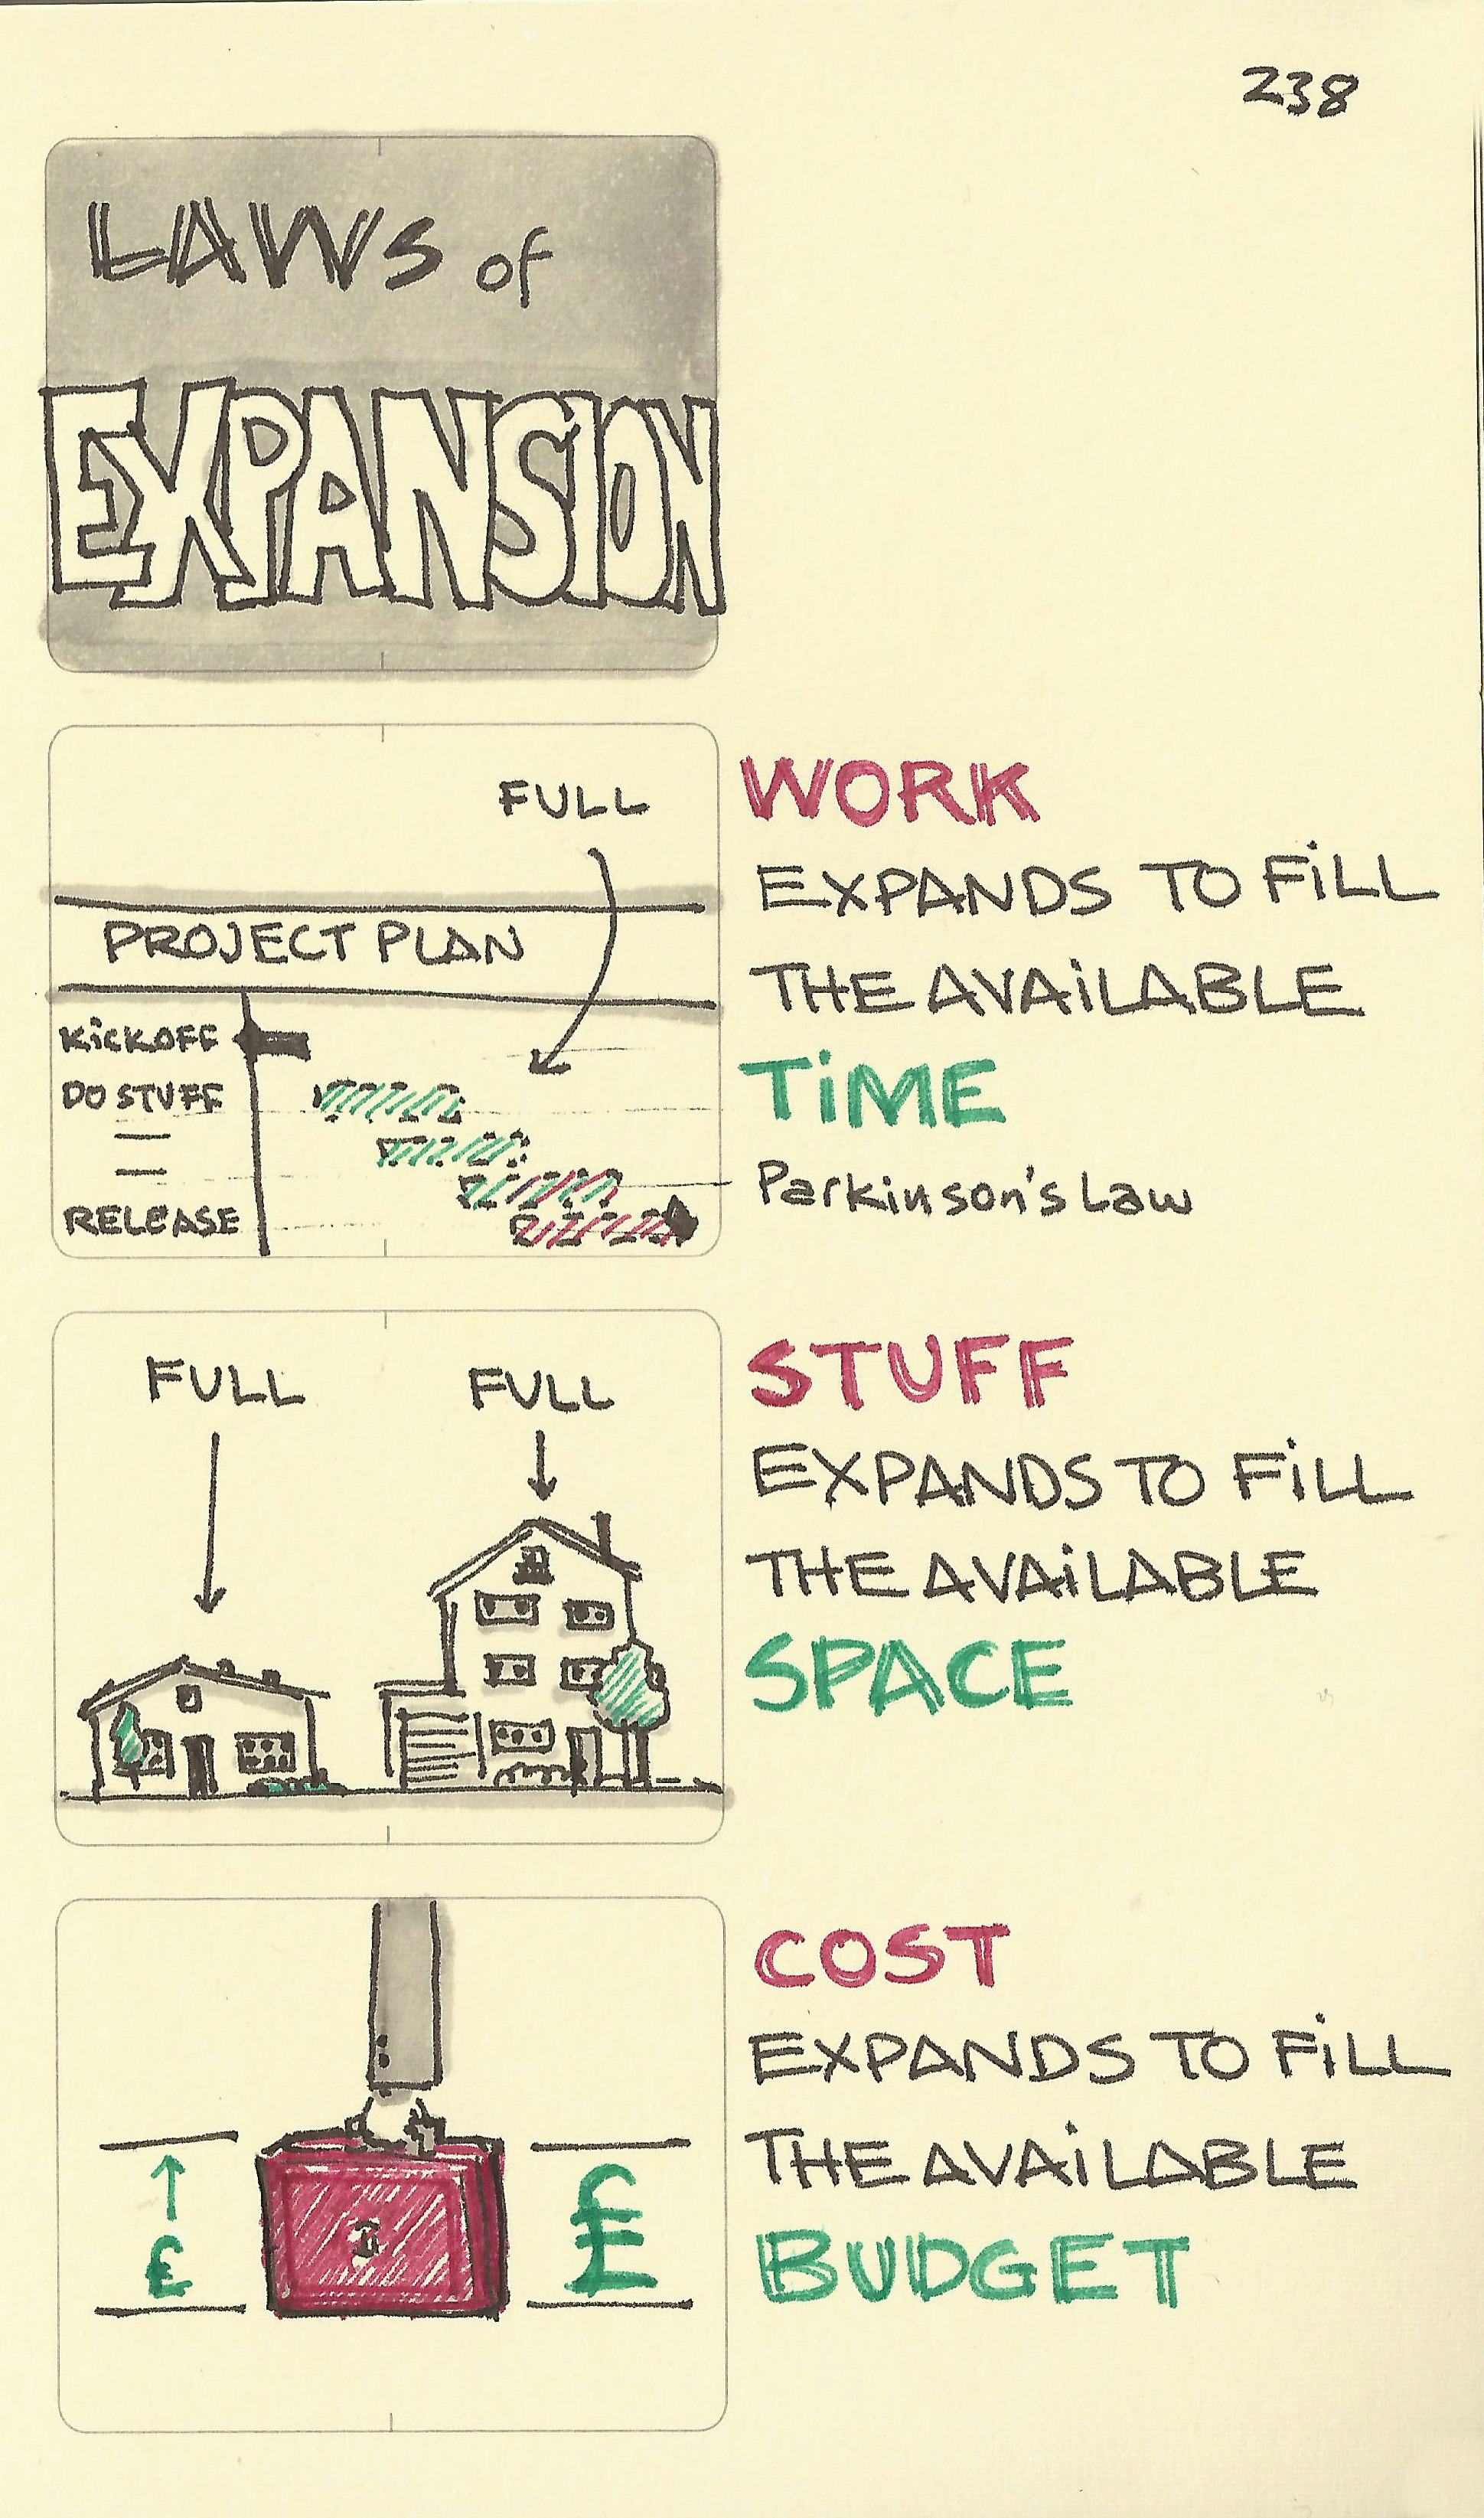 Laws of expansion - Sketchplanations